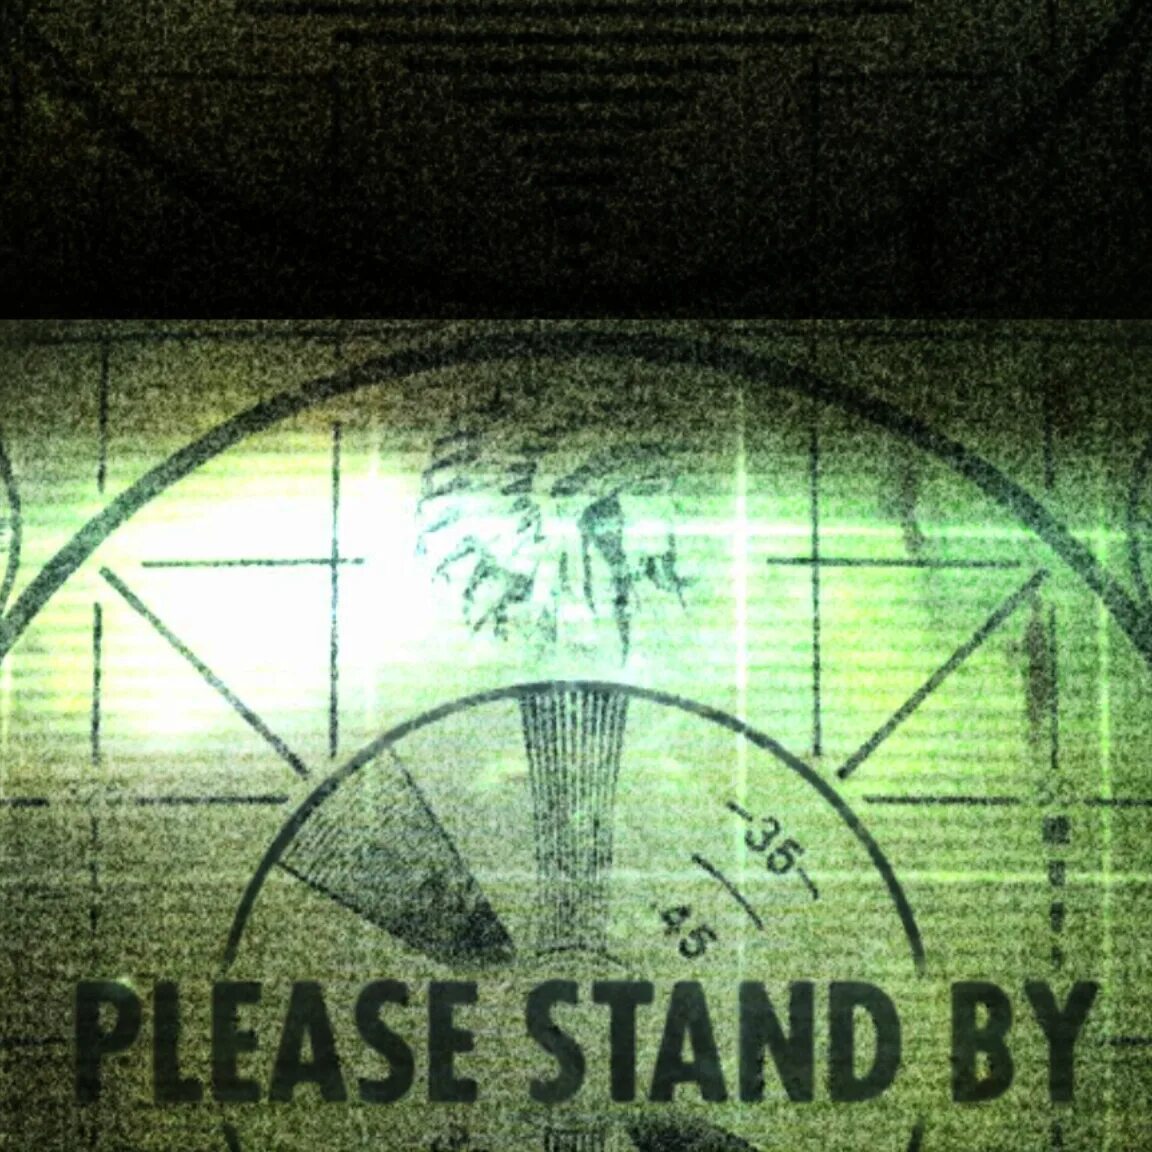 Please Stand by Fallout 3. Фоллаут please Stand by. Экран please Stand by. Please Stand by Fallout 76. 3 плиз